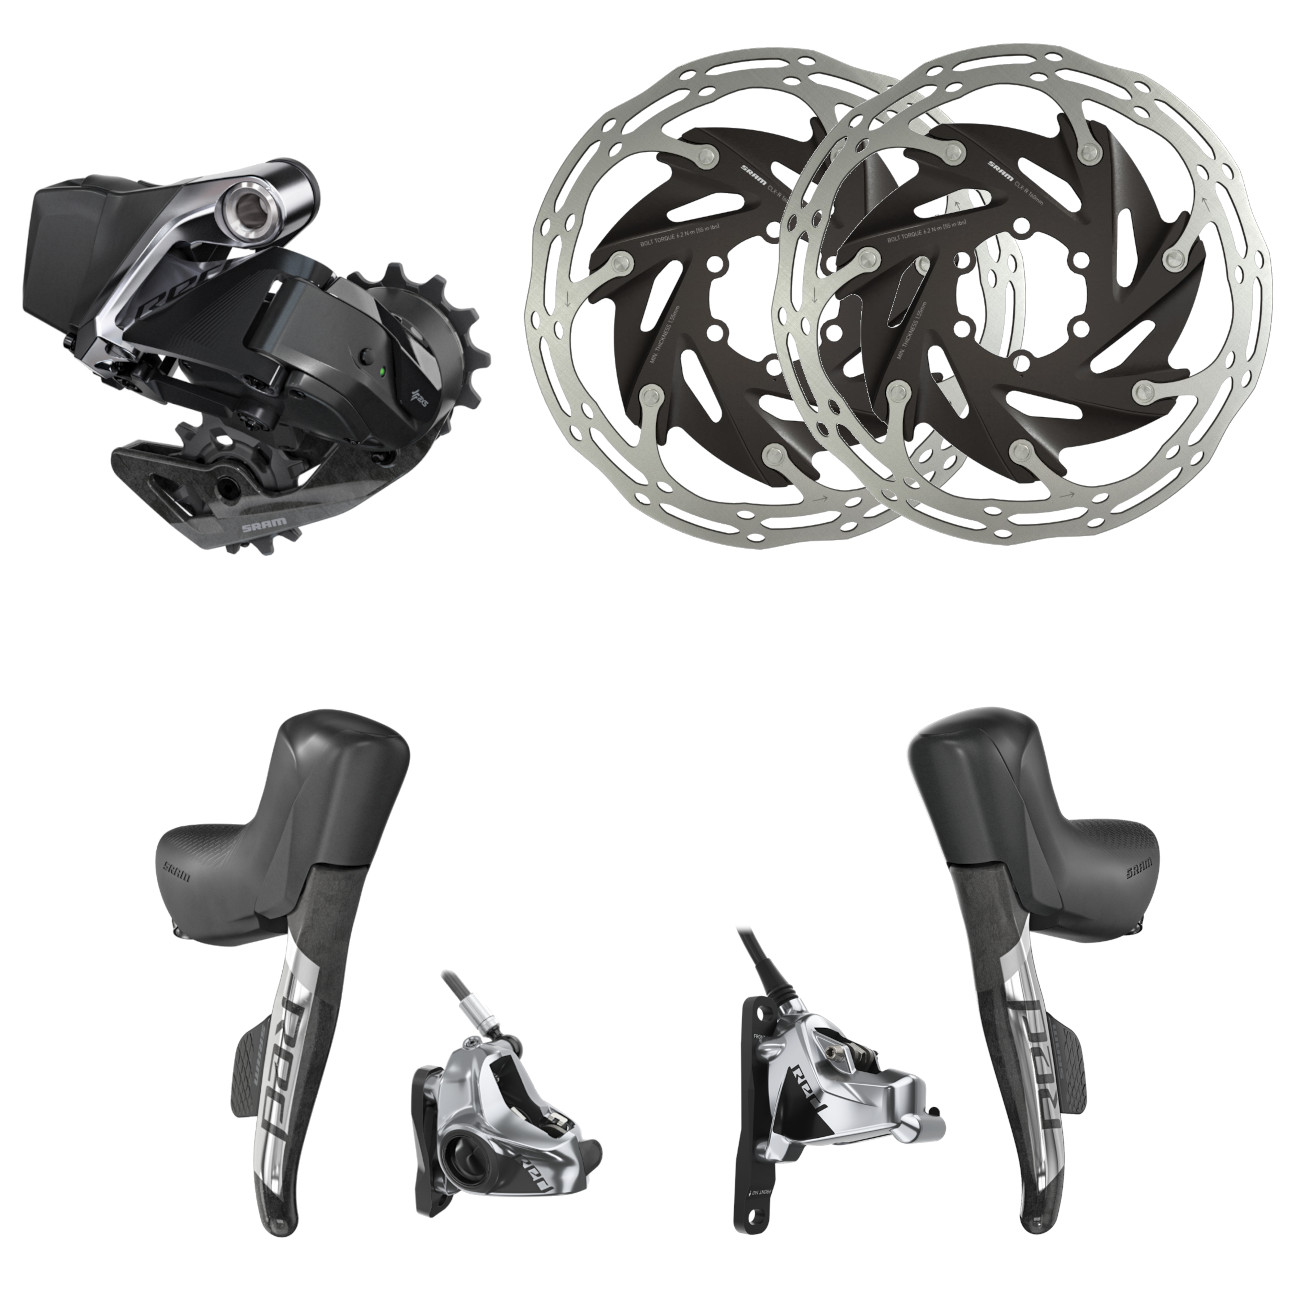 Image of SRAM RED eTap AXS HRD 1x12 Upgrade Set with Hydraulic Disc Brakes - Flat Mount - 6-Bolt